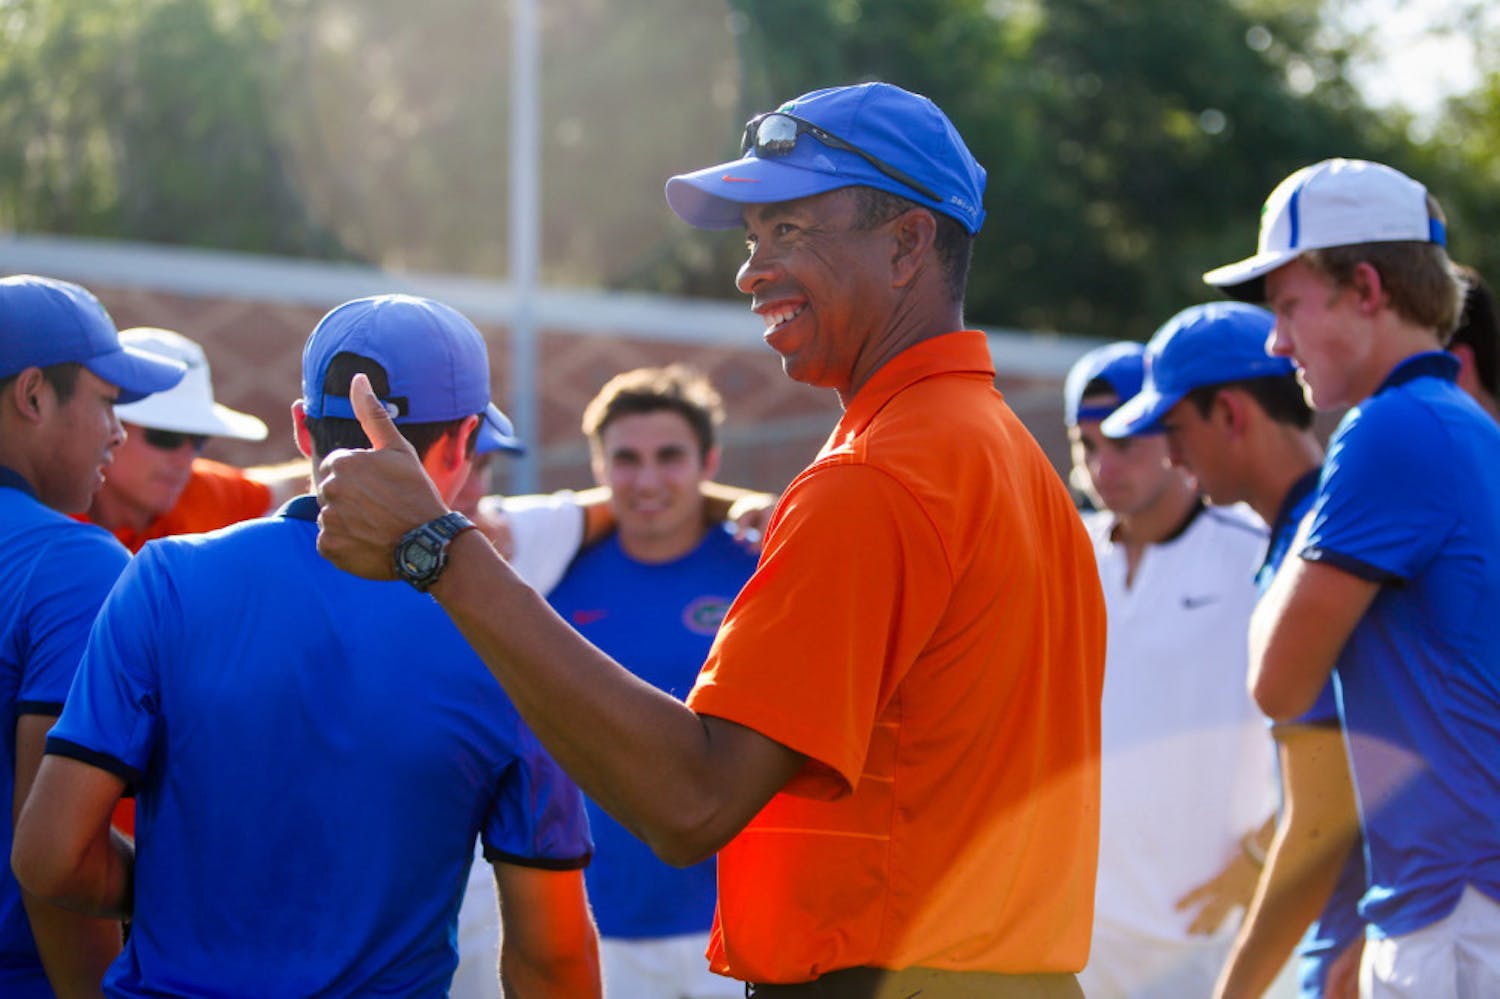 Coach Bryan Shelton led the Gators to the No. 1-seed in the SEC Tournament. They have won 16 straight home matches dating back to last year.
&nbsp;